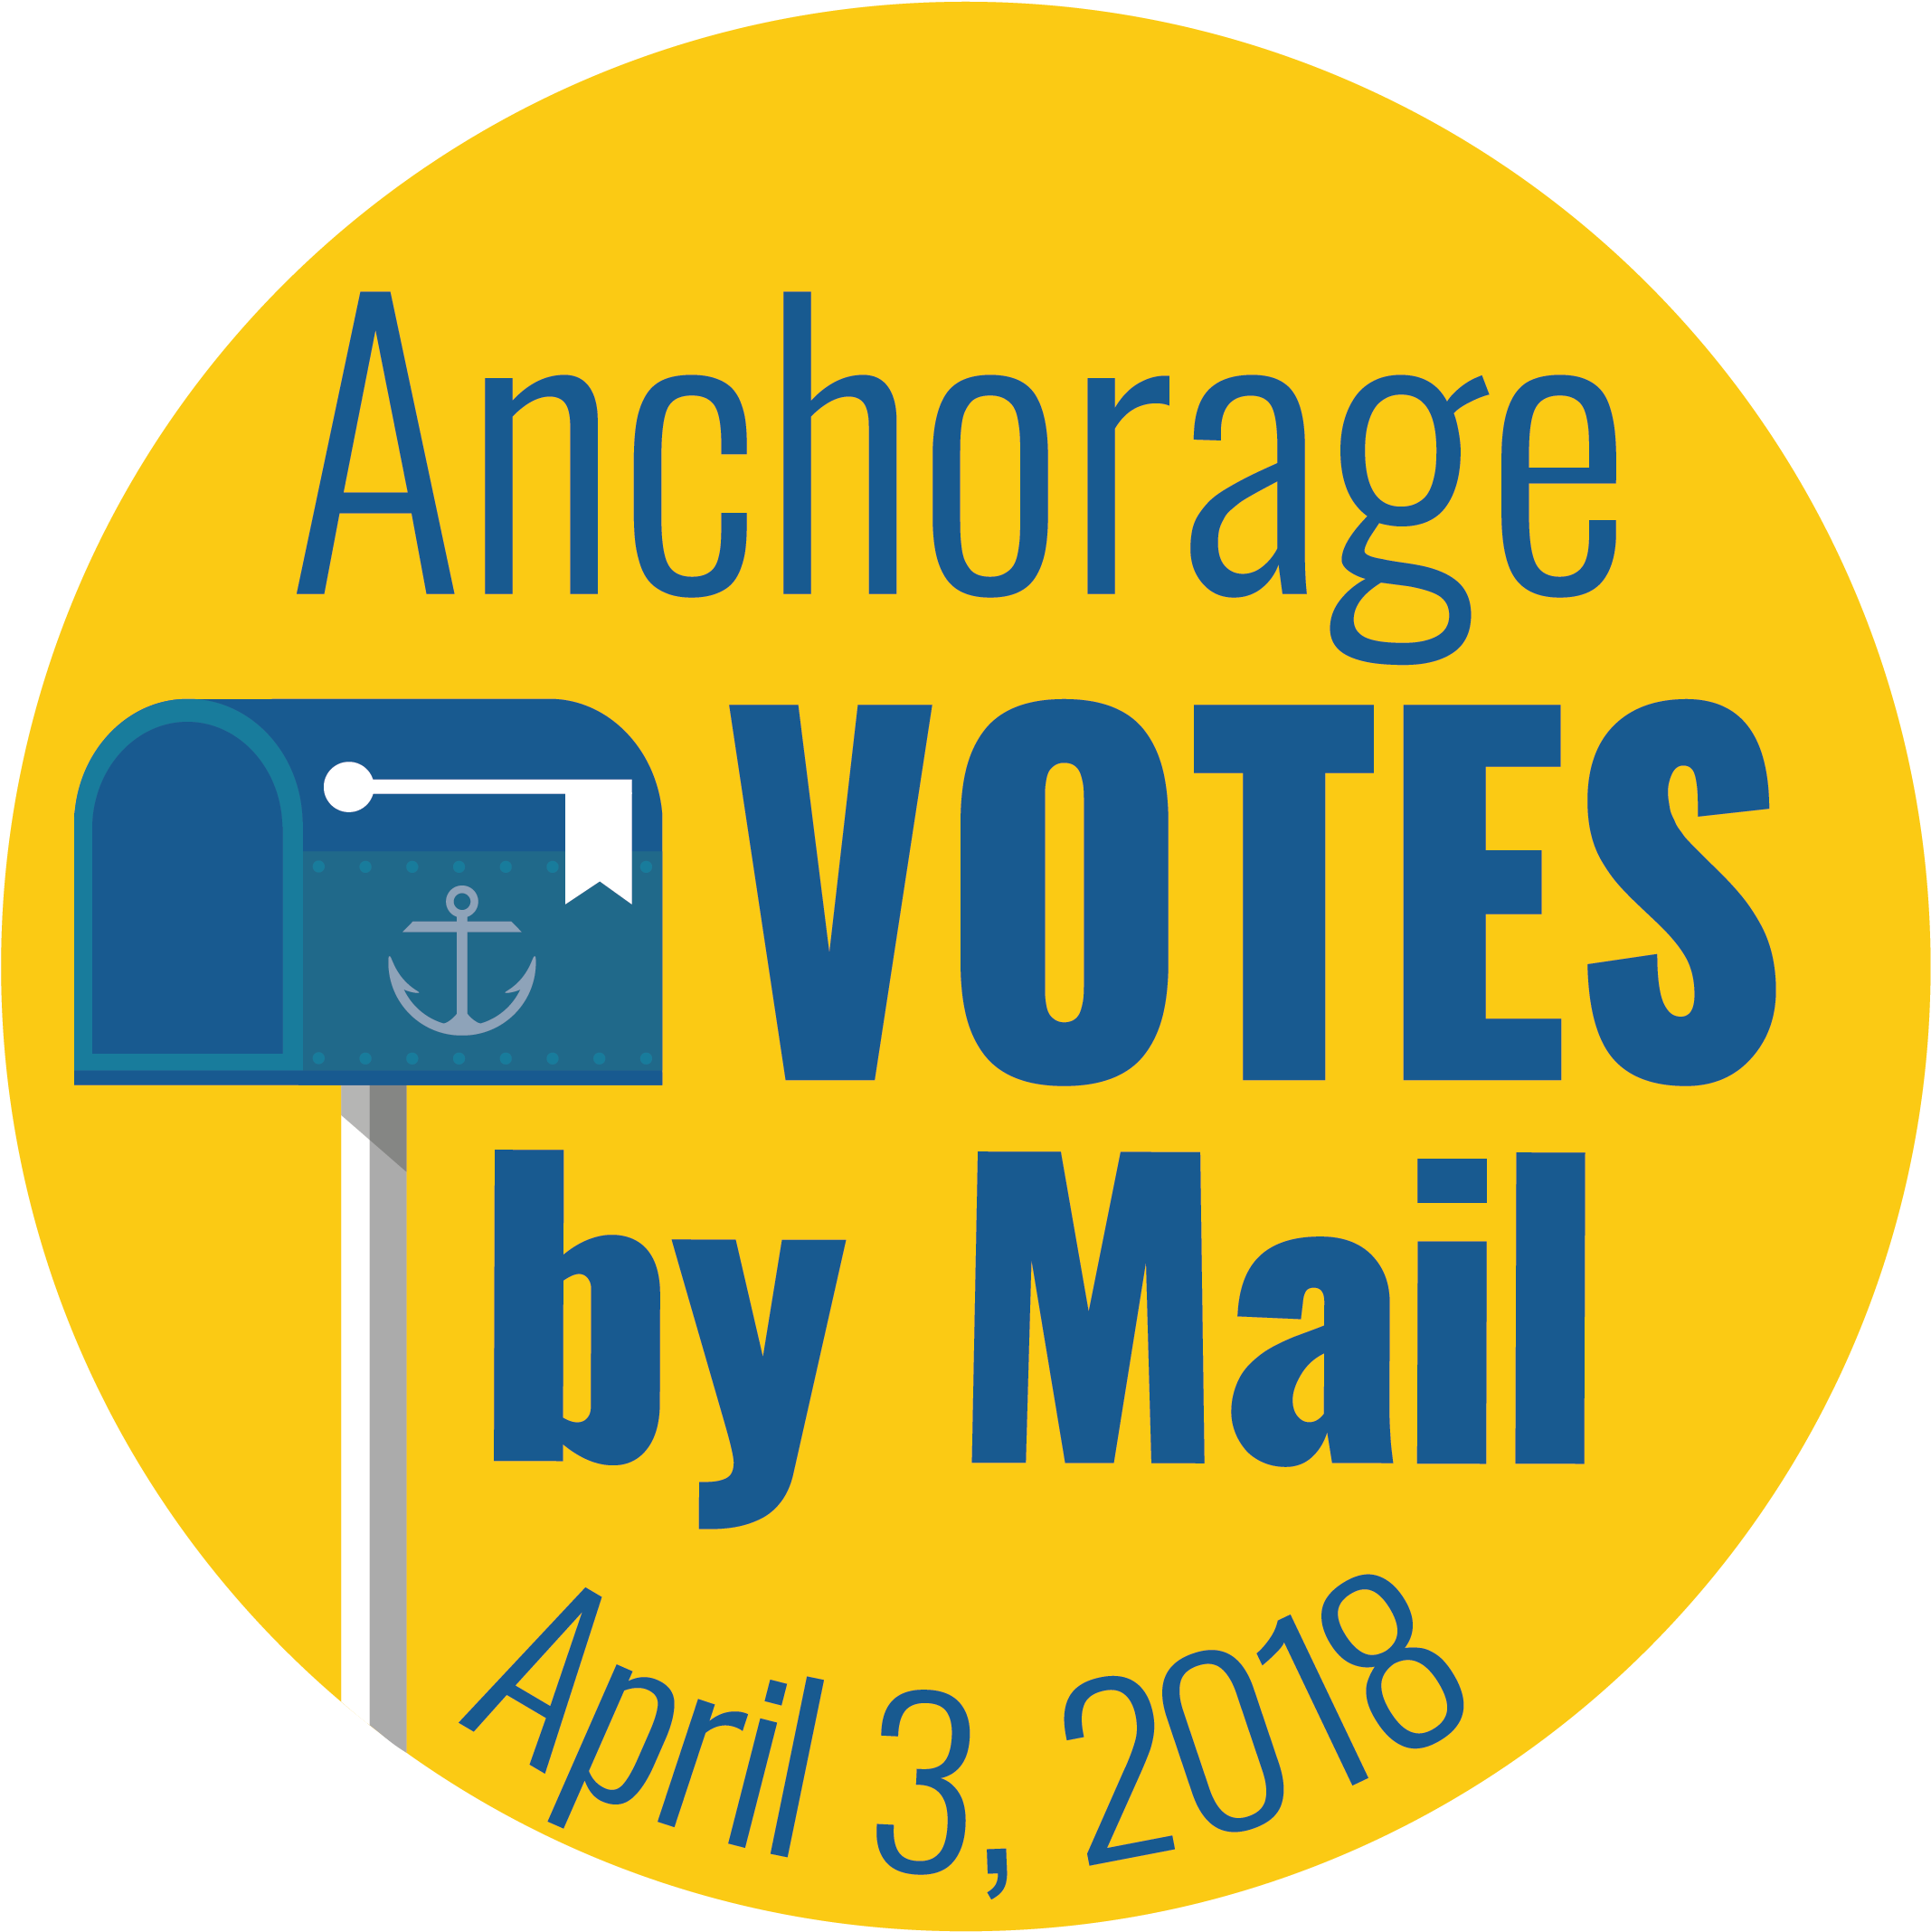 History Of Our Anchorage Votes Logo - Anchorage Votes By Mail (2301x2301)